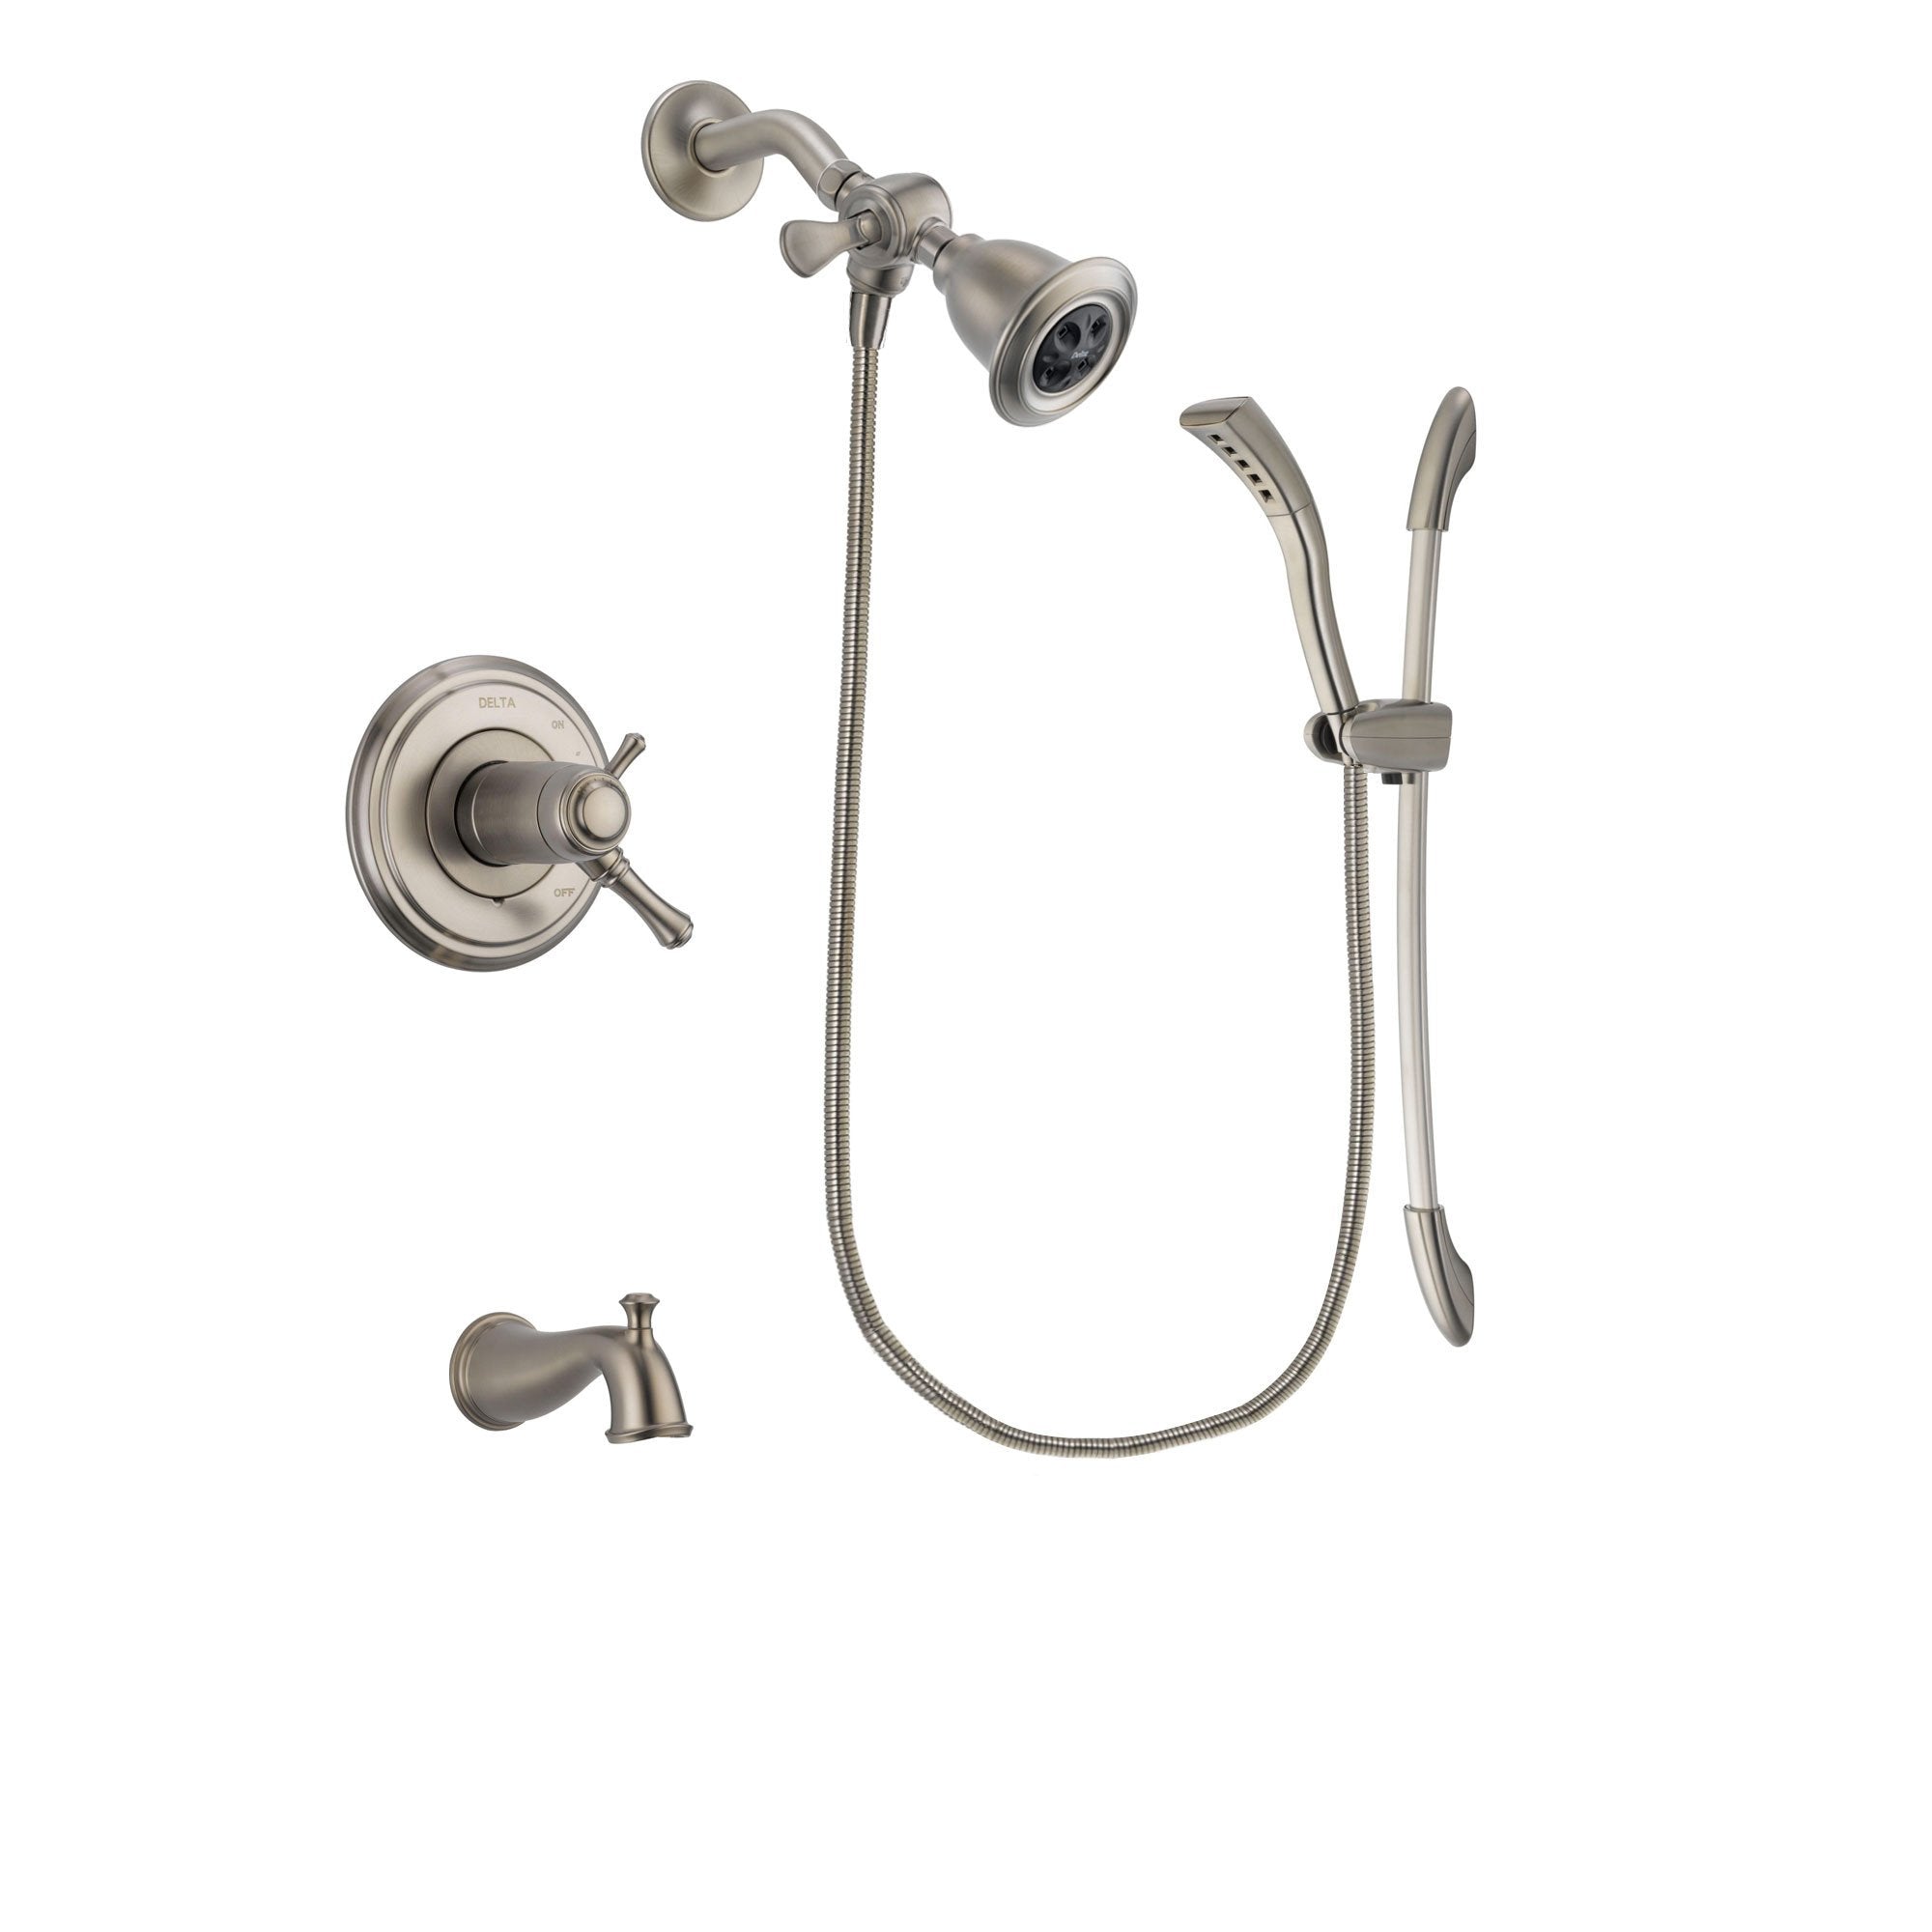 Delta Cassidy Stainless Steel Finish Thermostatic Tub and Shower Faucet System Package with Water Efficient Showerhead and Handshower with Slide Bar Includes Rough-in Valve and Tub Spout DSP1419V